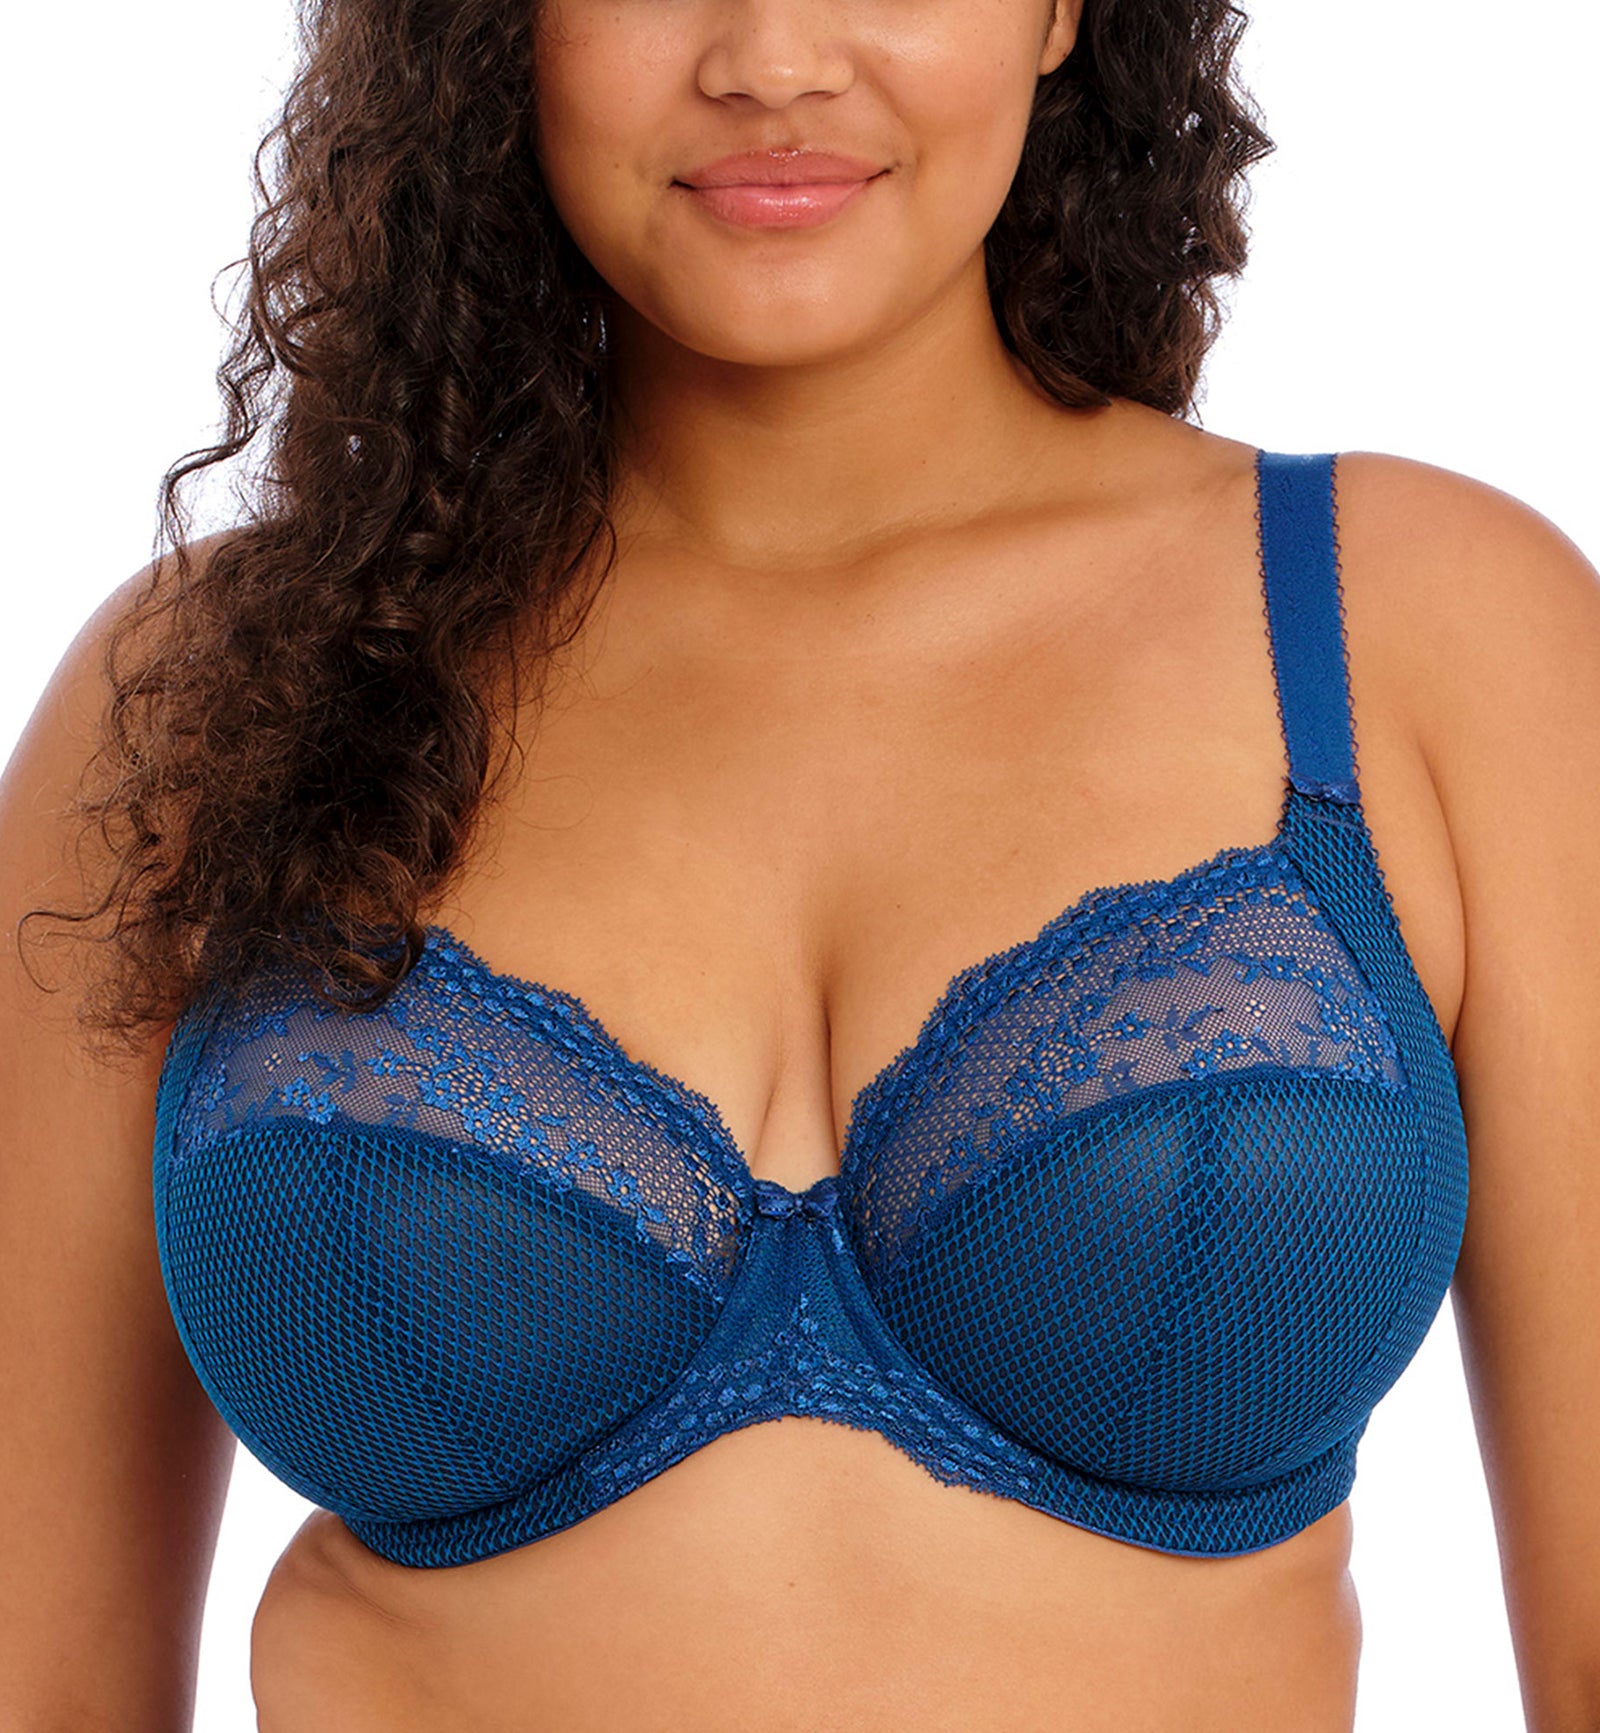 Elomi Charley Banded Stretch Lace Plunge Underwire Bra (4382),32GG,Petrol - Petrol,32GG